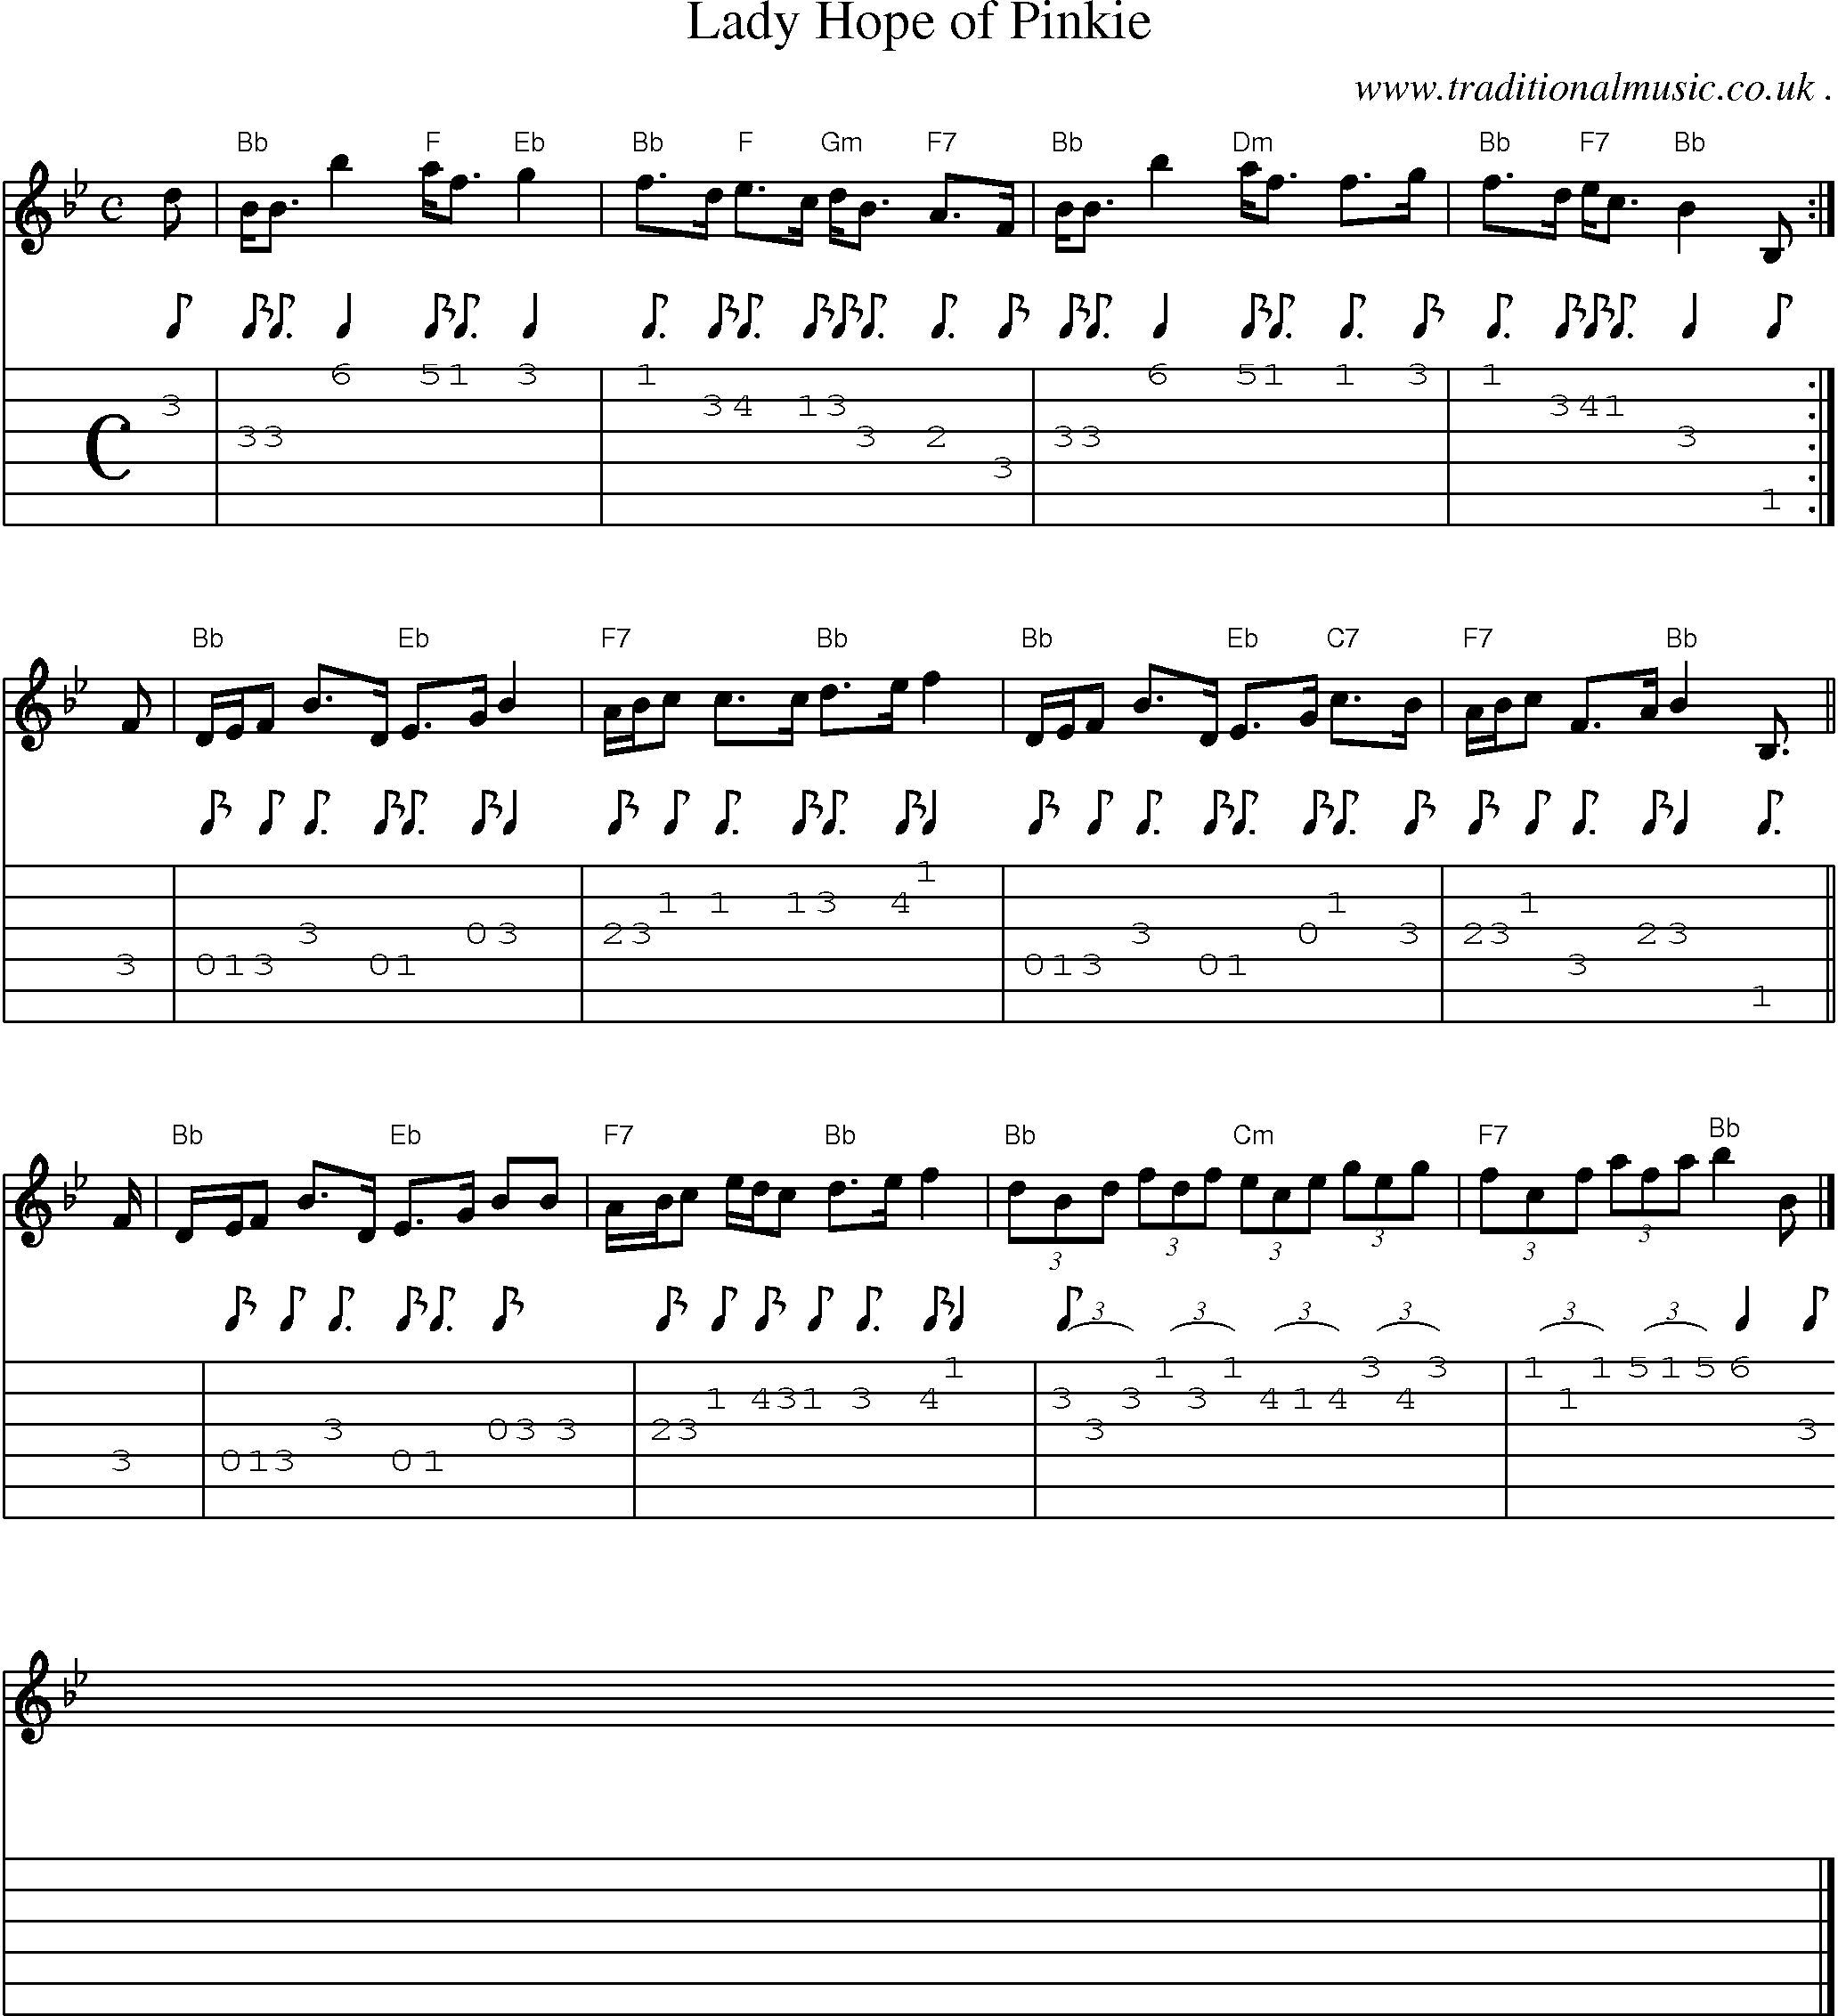 Sheet-music  score, Chords and Guitar Tabs for Lady Hope Of Pinkie